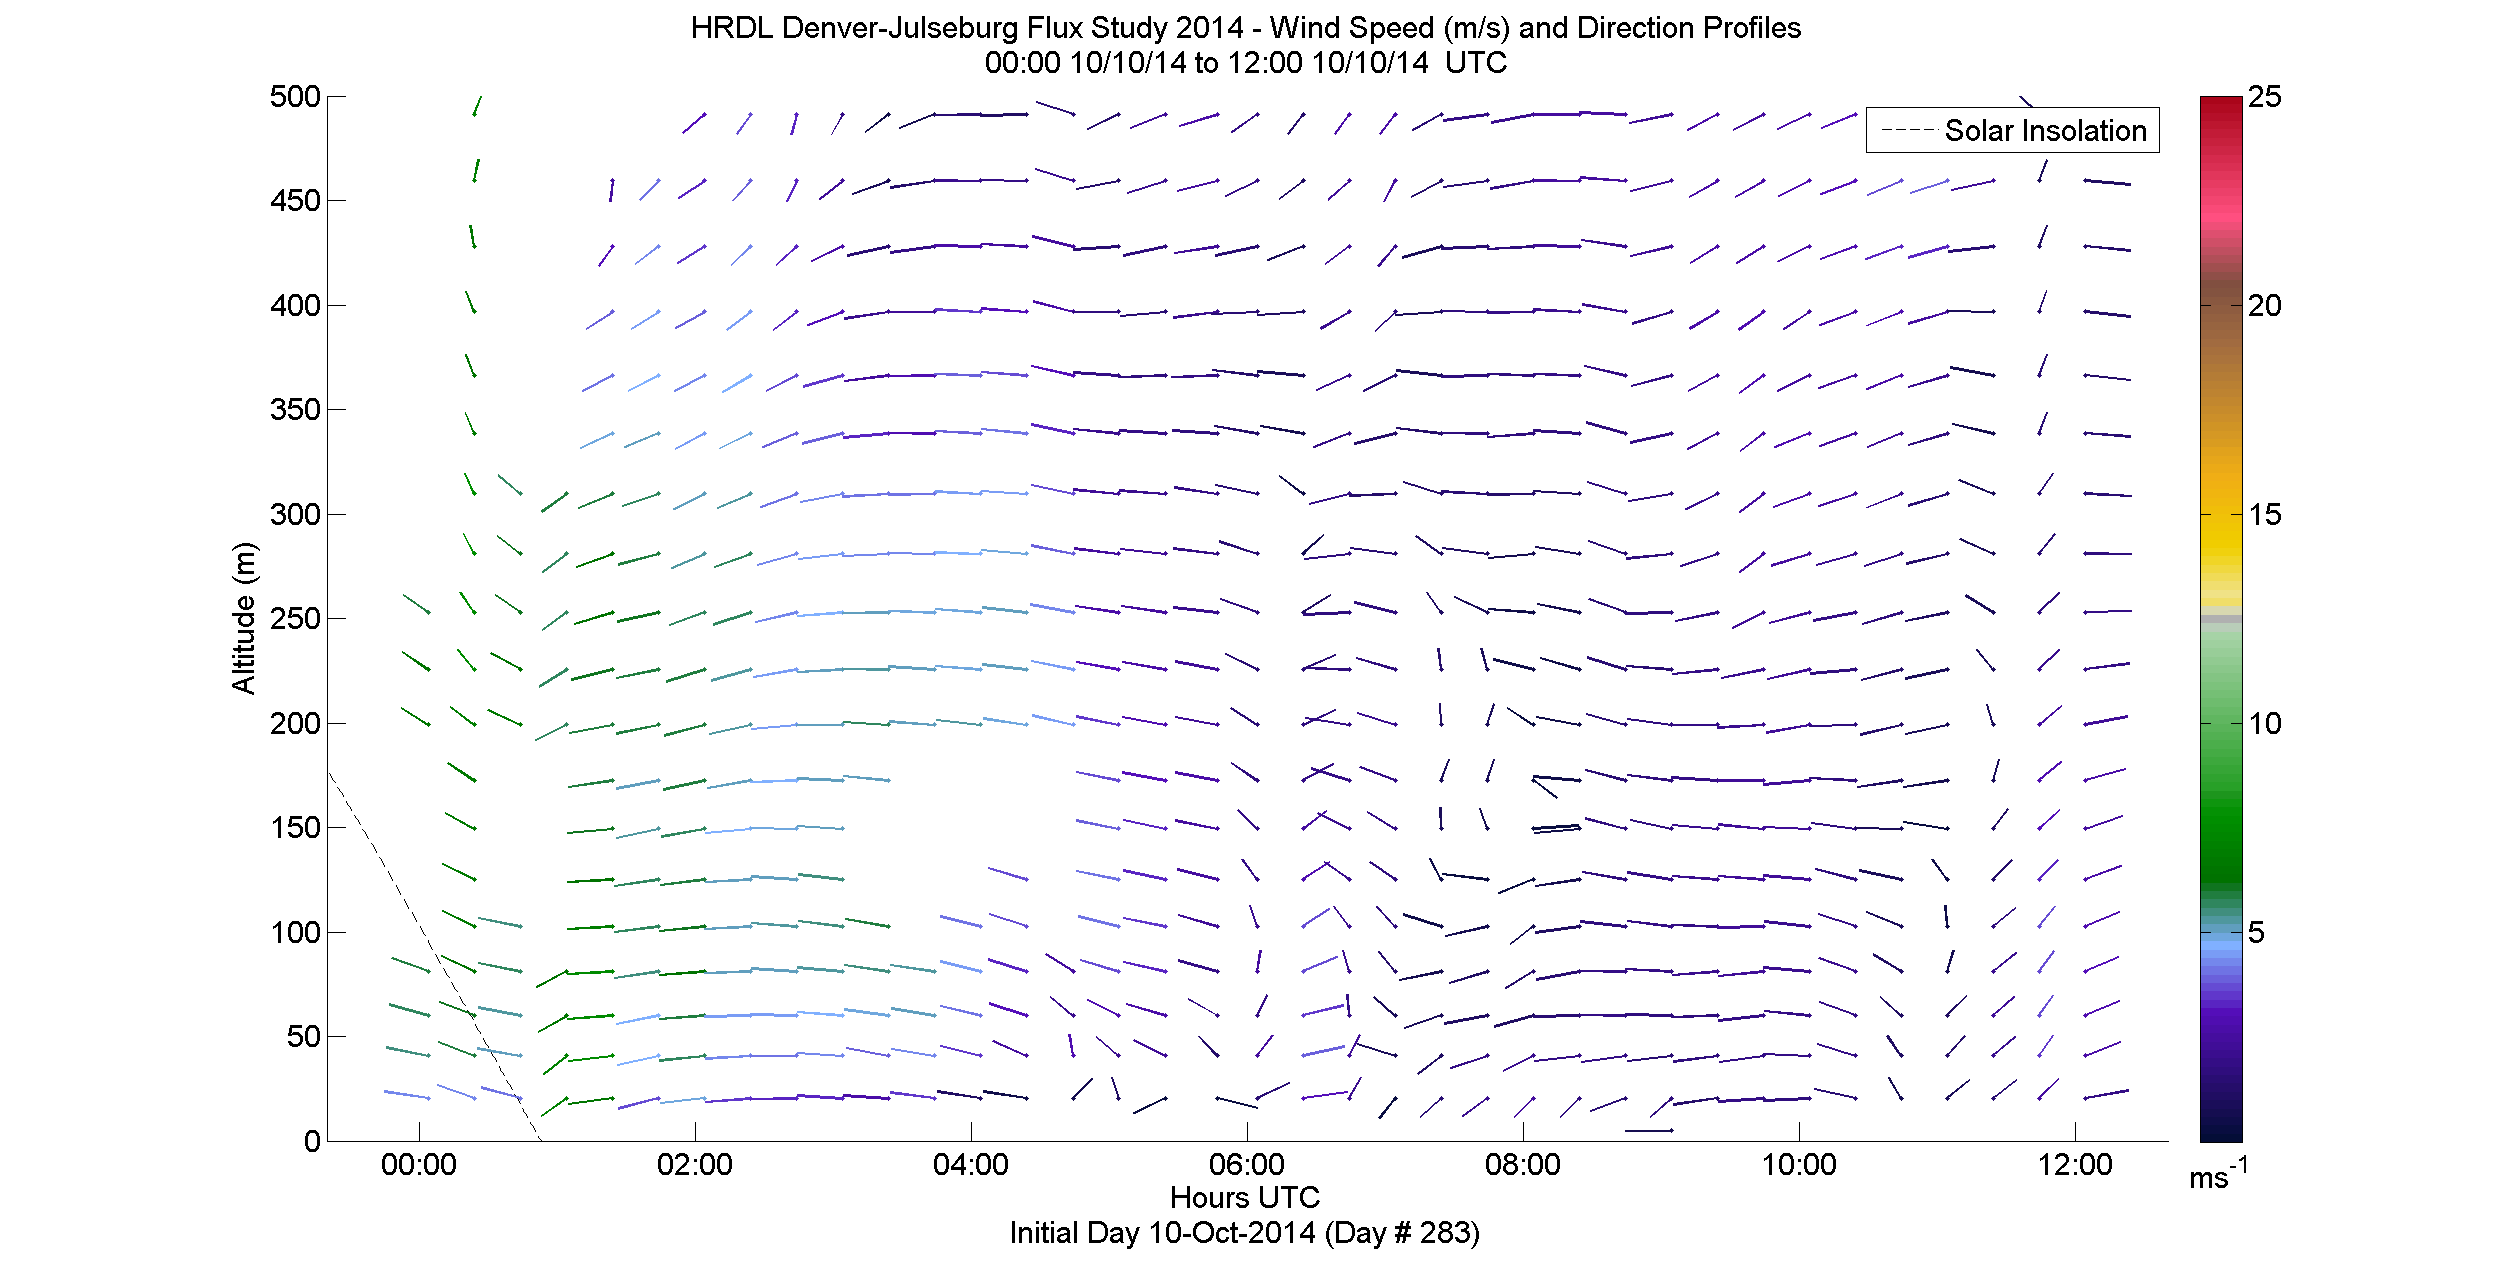 HRDL speed and direction profile - October 10 am